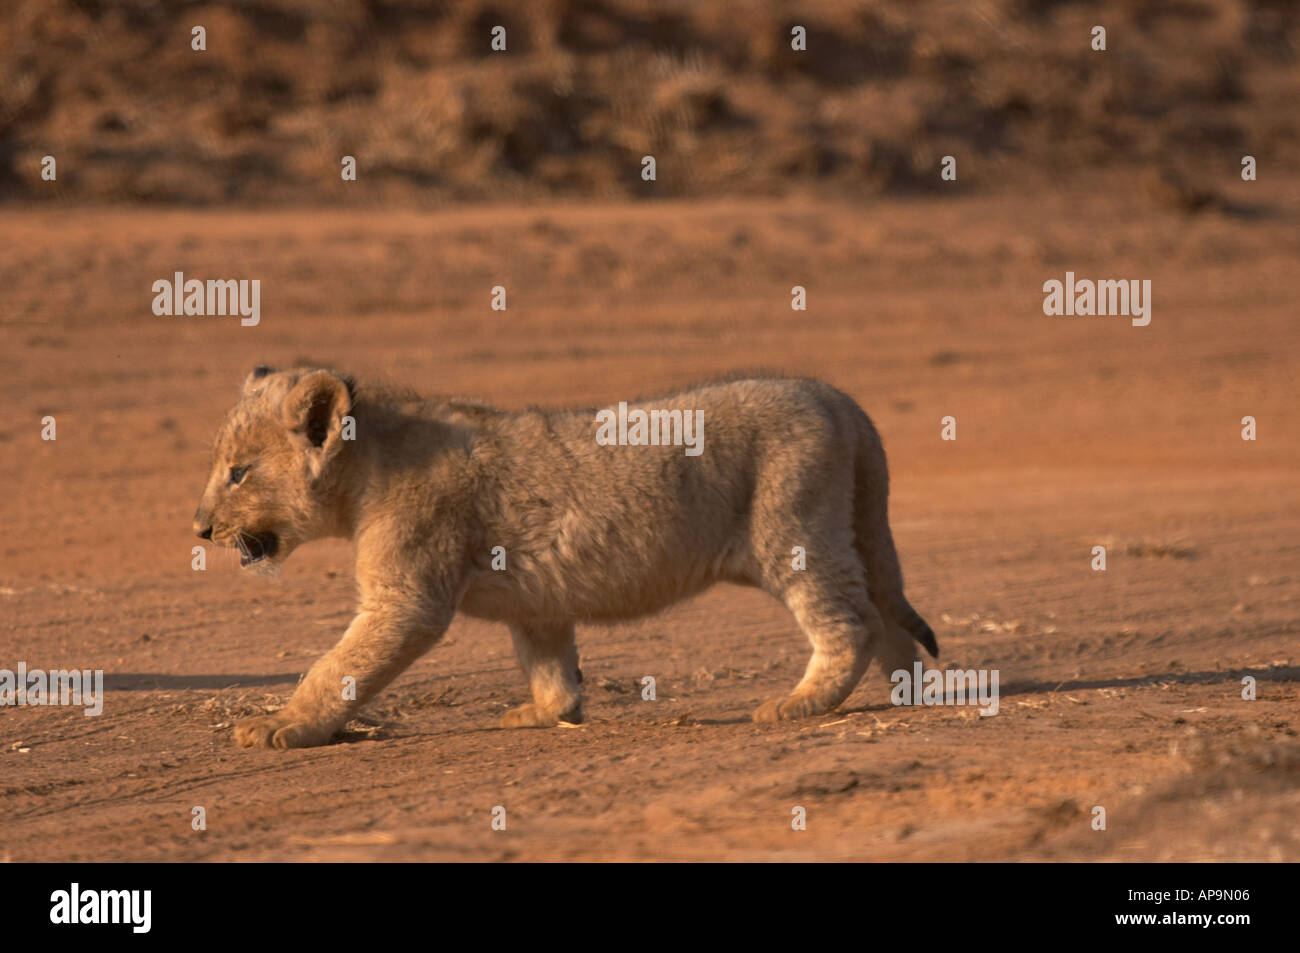 Lion cub about 6 weeks old Stock Photo